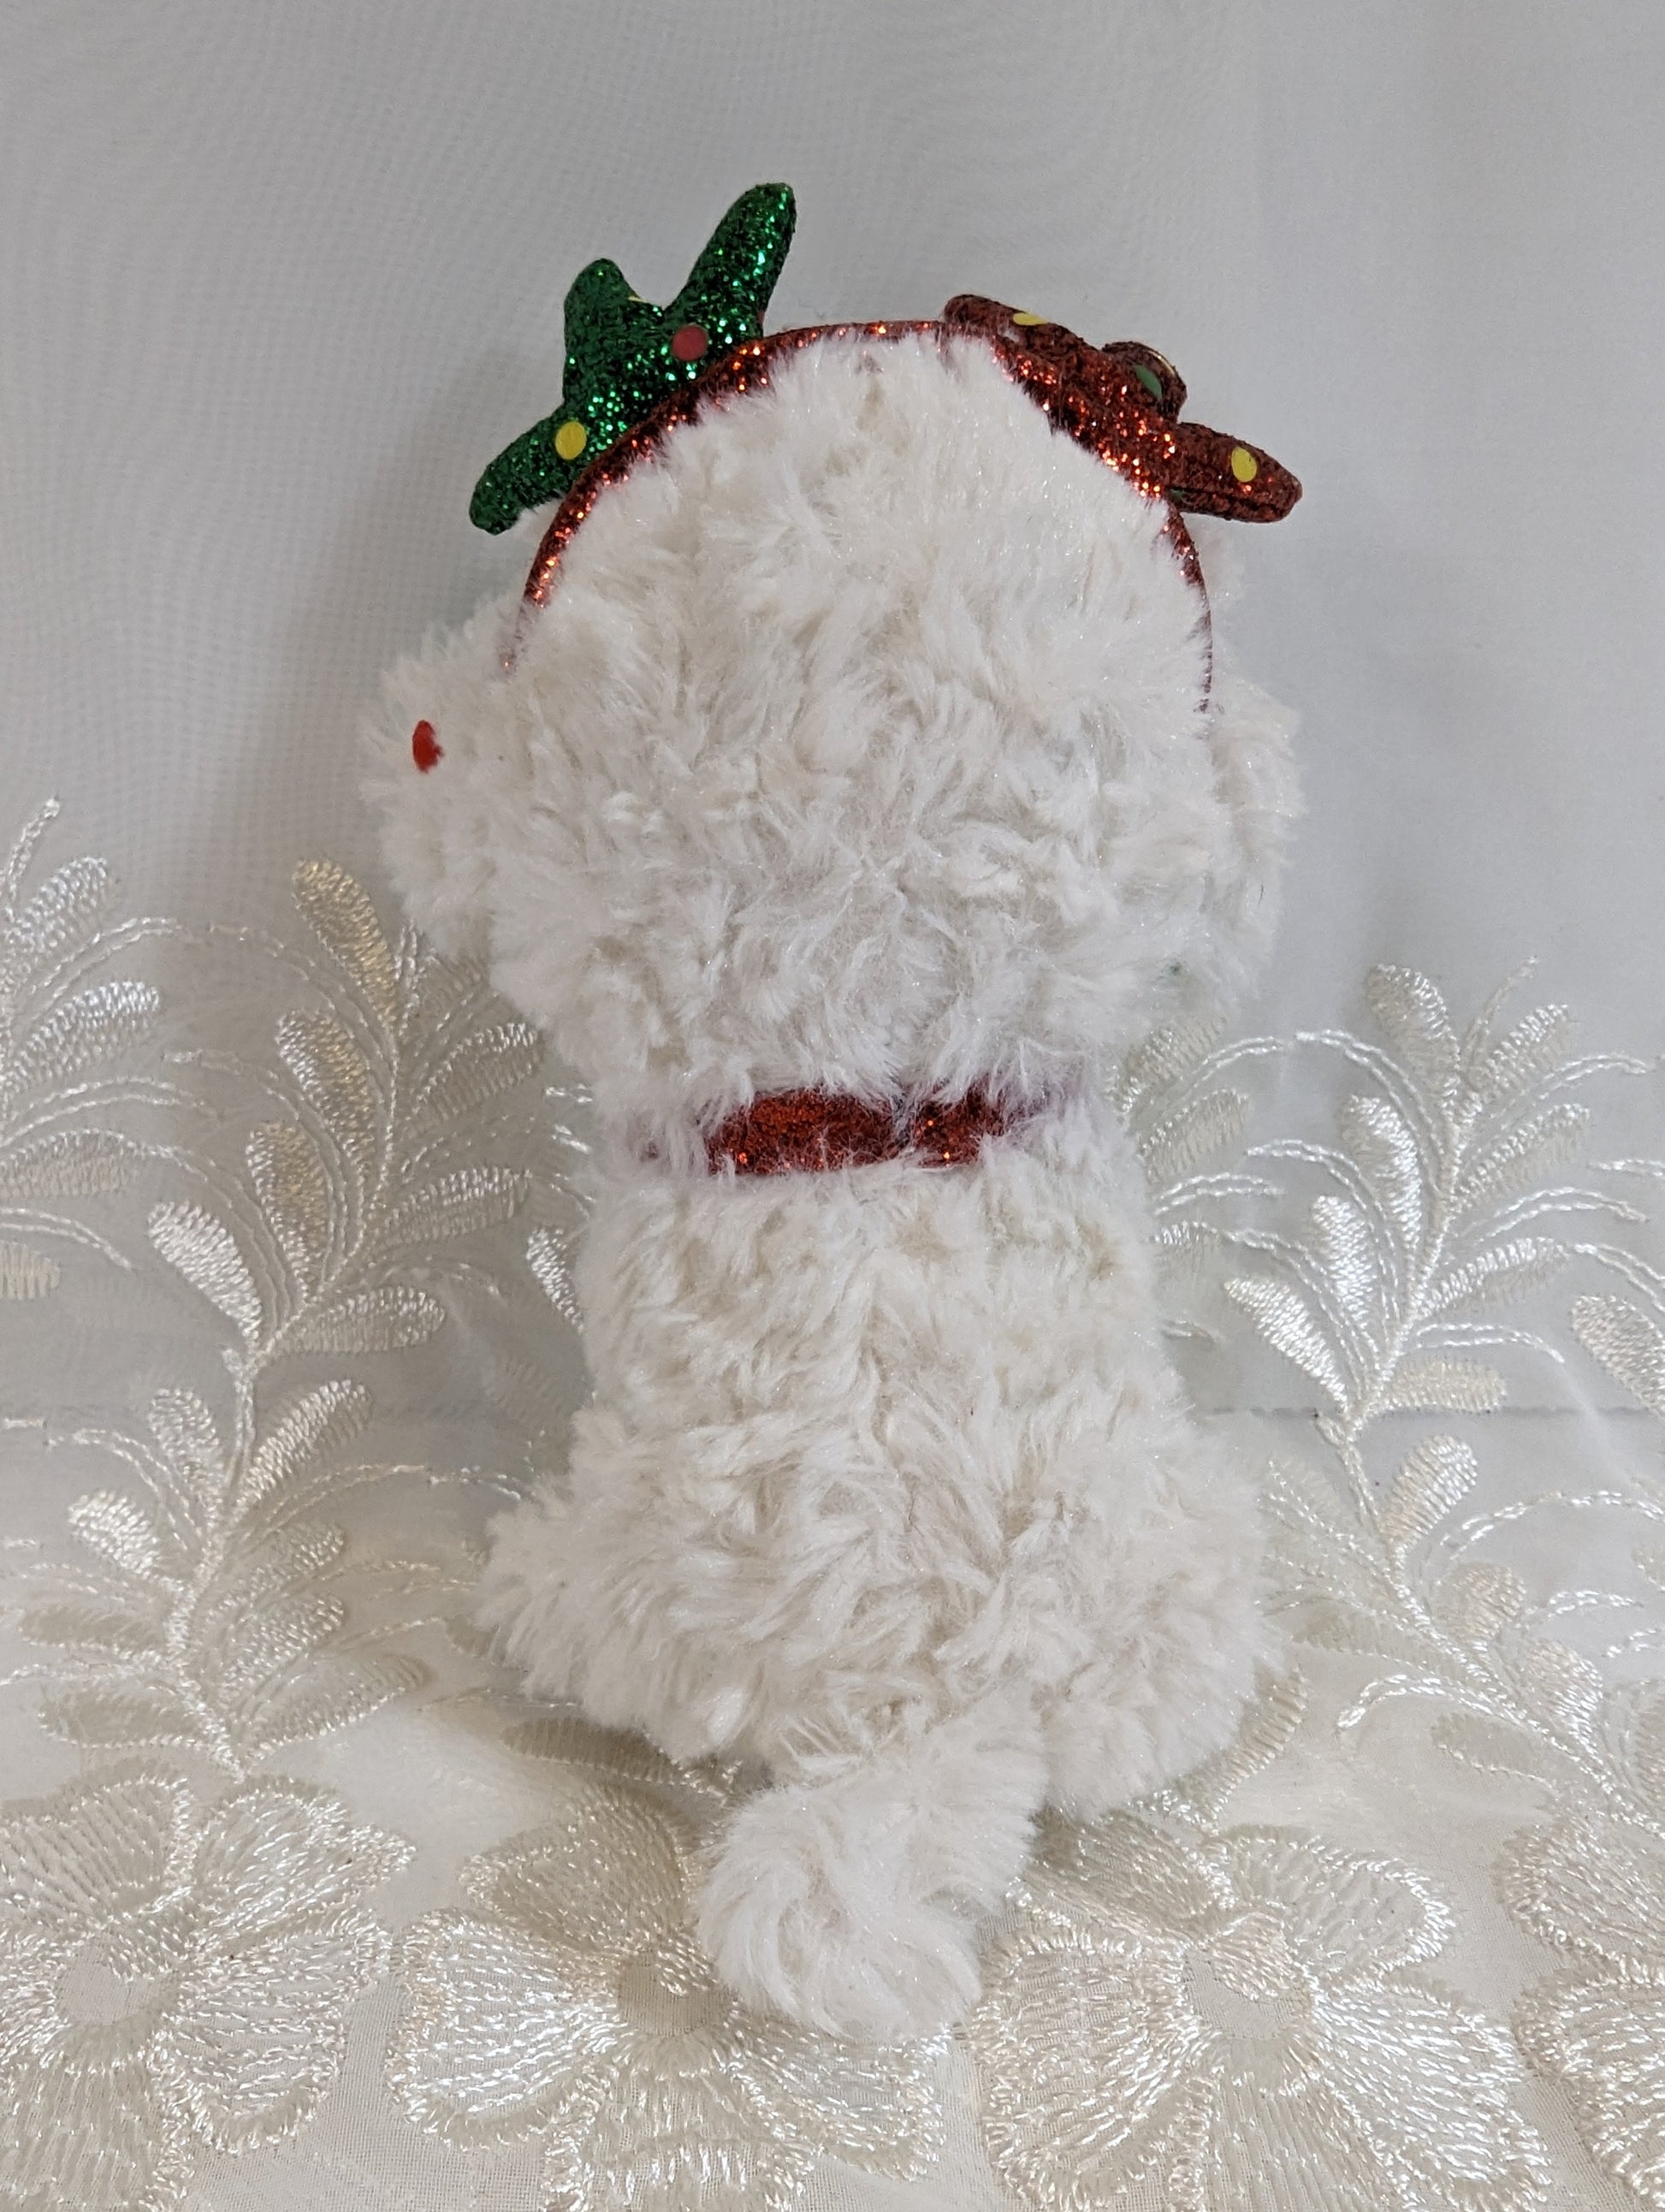 Ty Beanie Boo - Sugar The White Dog With Antlers (6in) No Tag, Scuffed Eye - Vintage Beanies Canada